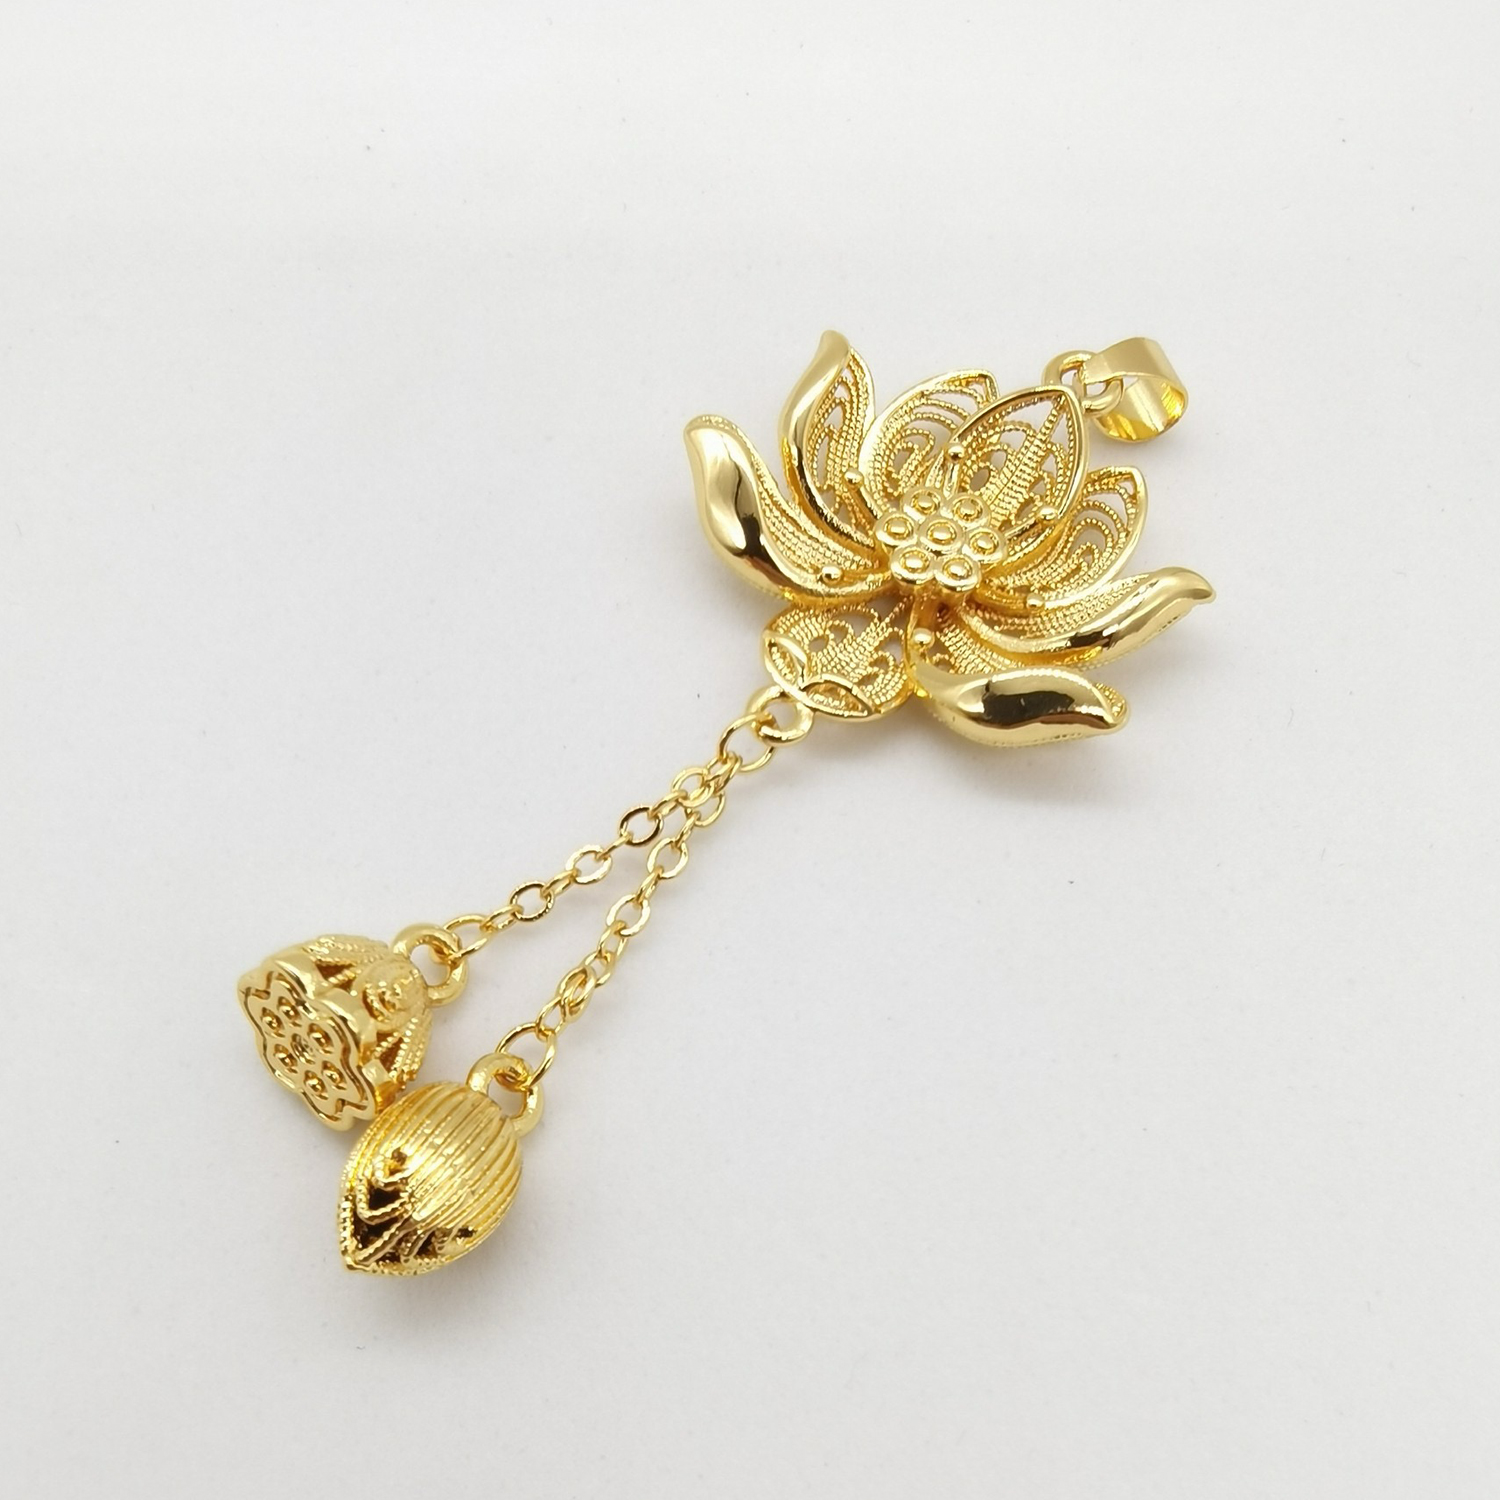 Alluvial gold ancient method vacuum electroplating 24K gold lotus pendant for joy of two generations